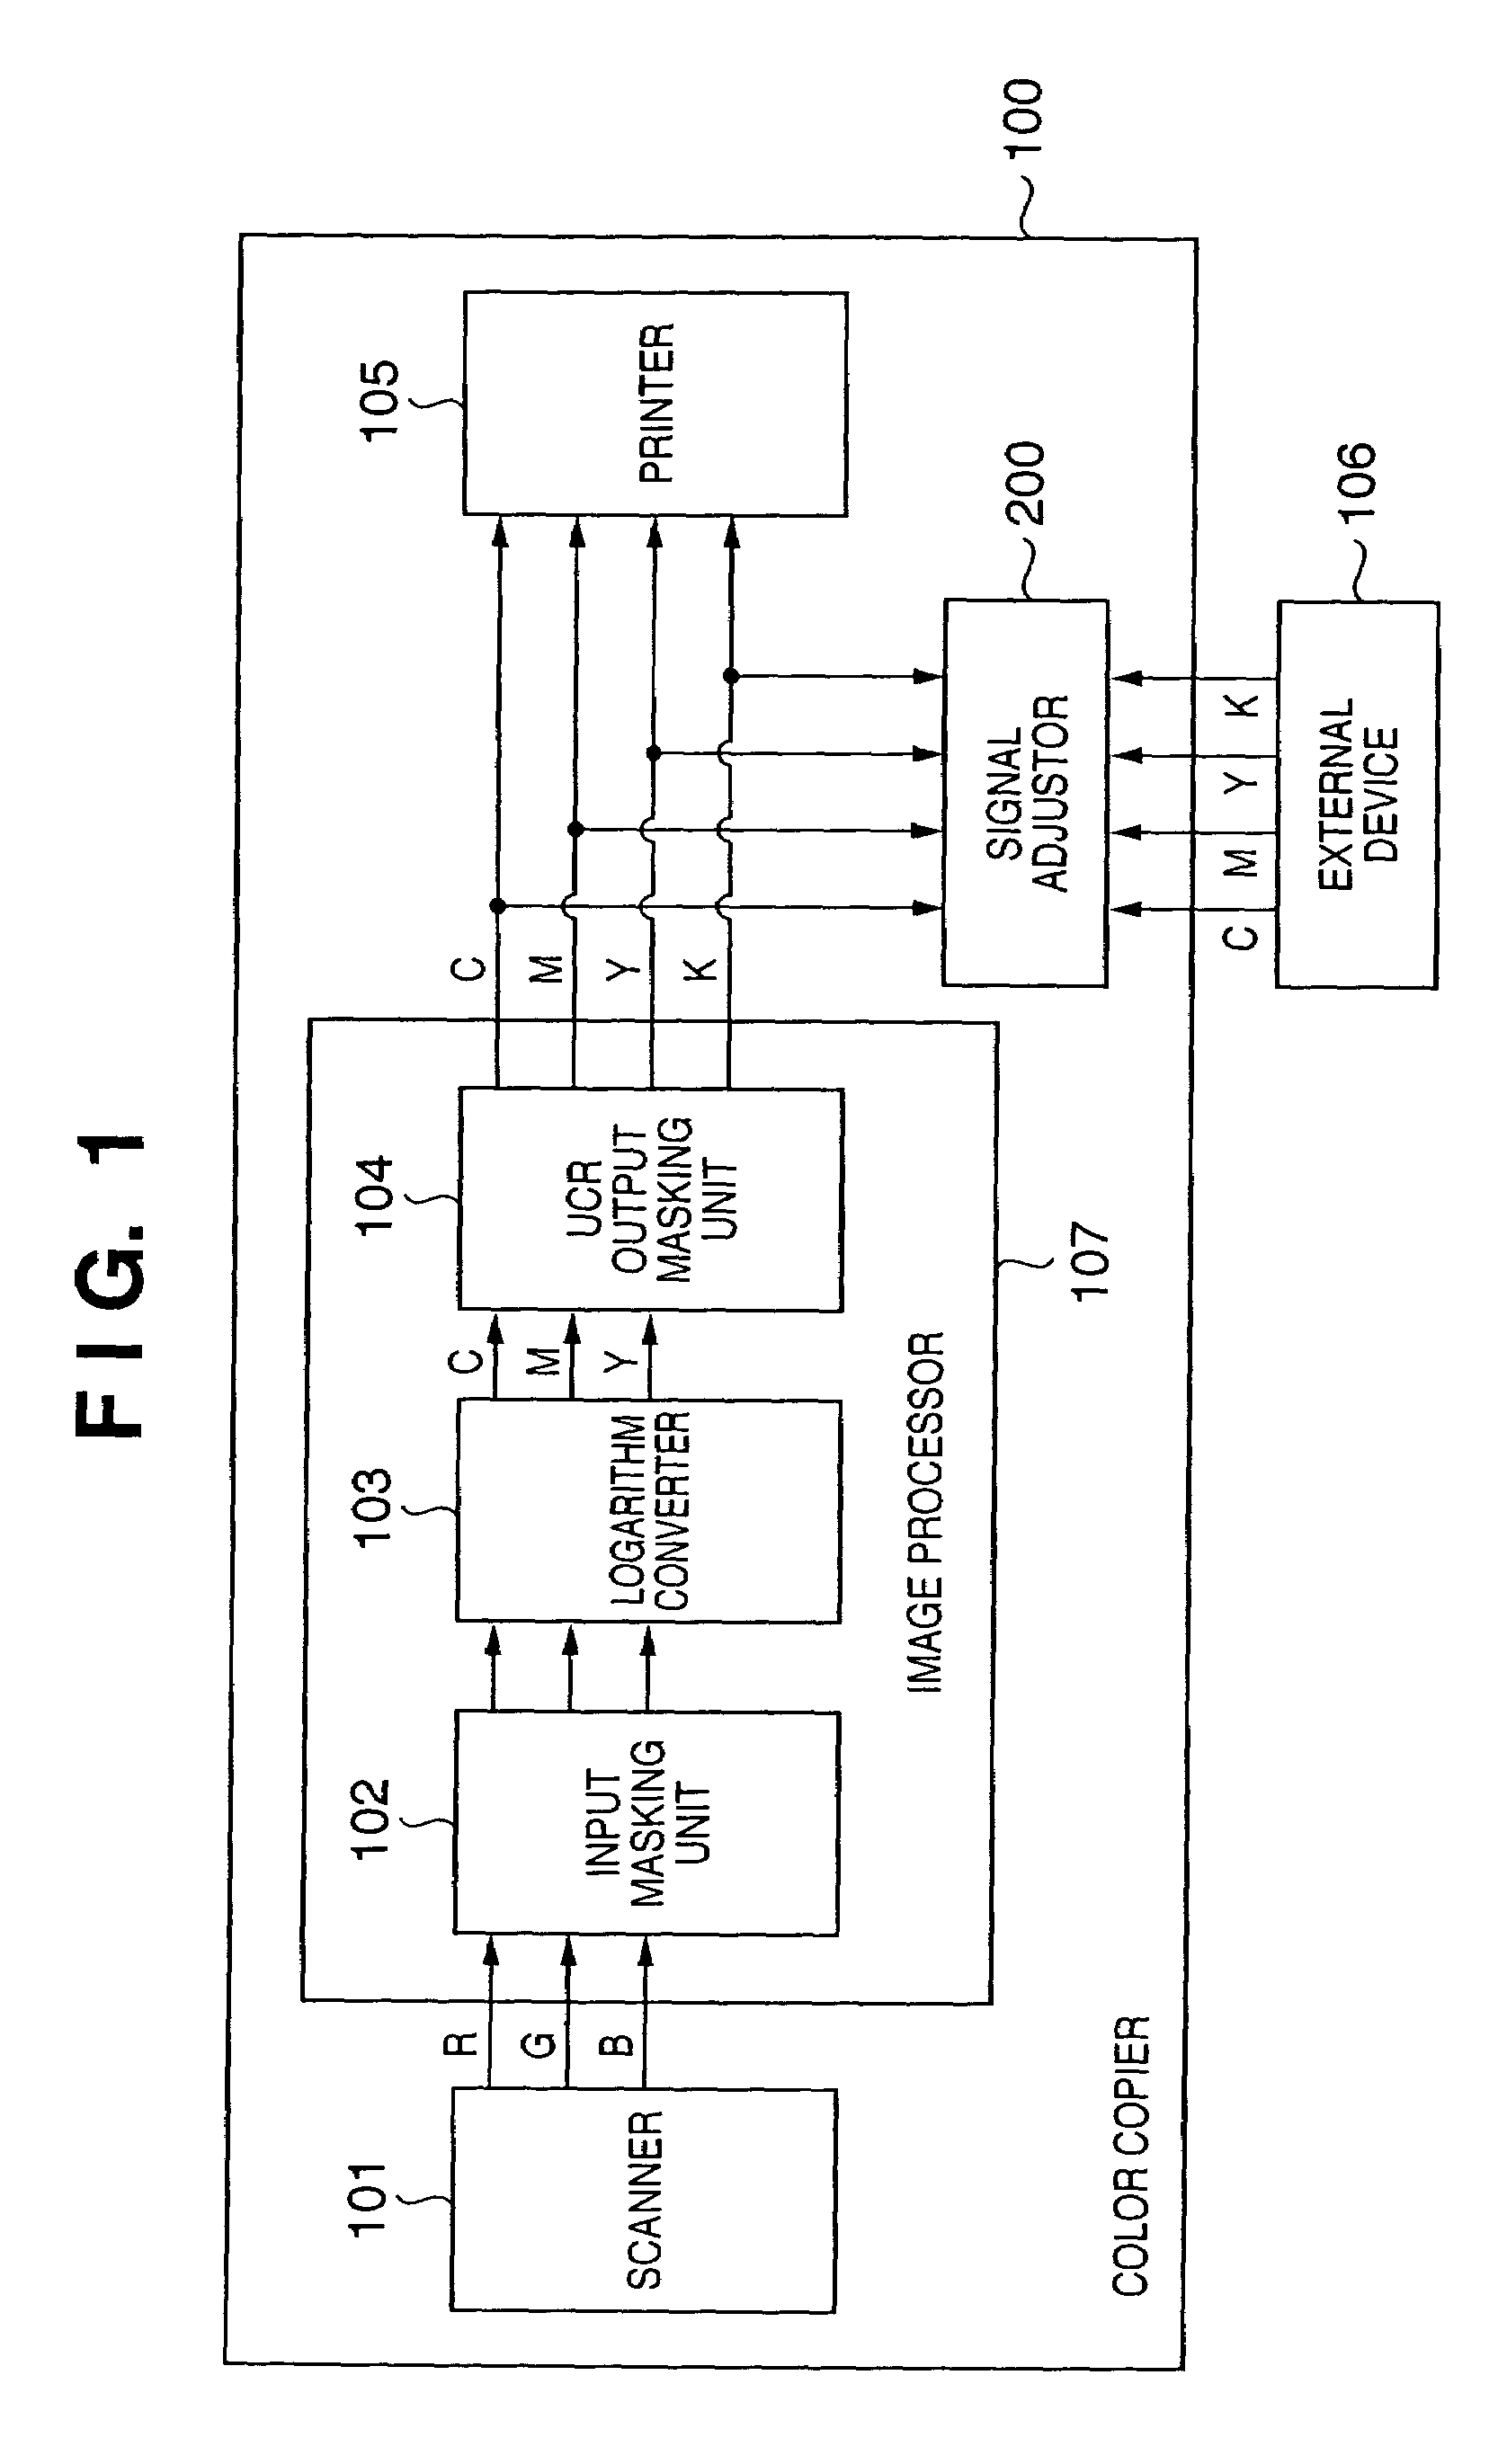 Recording material consumption control for an image forming apparatus